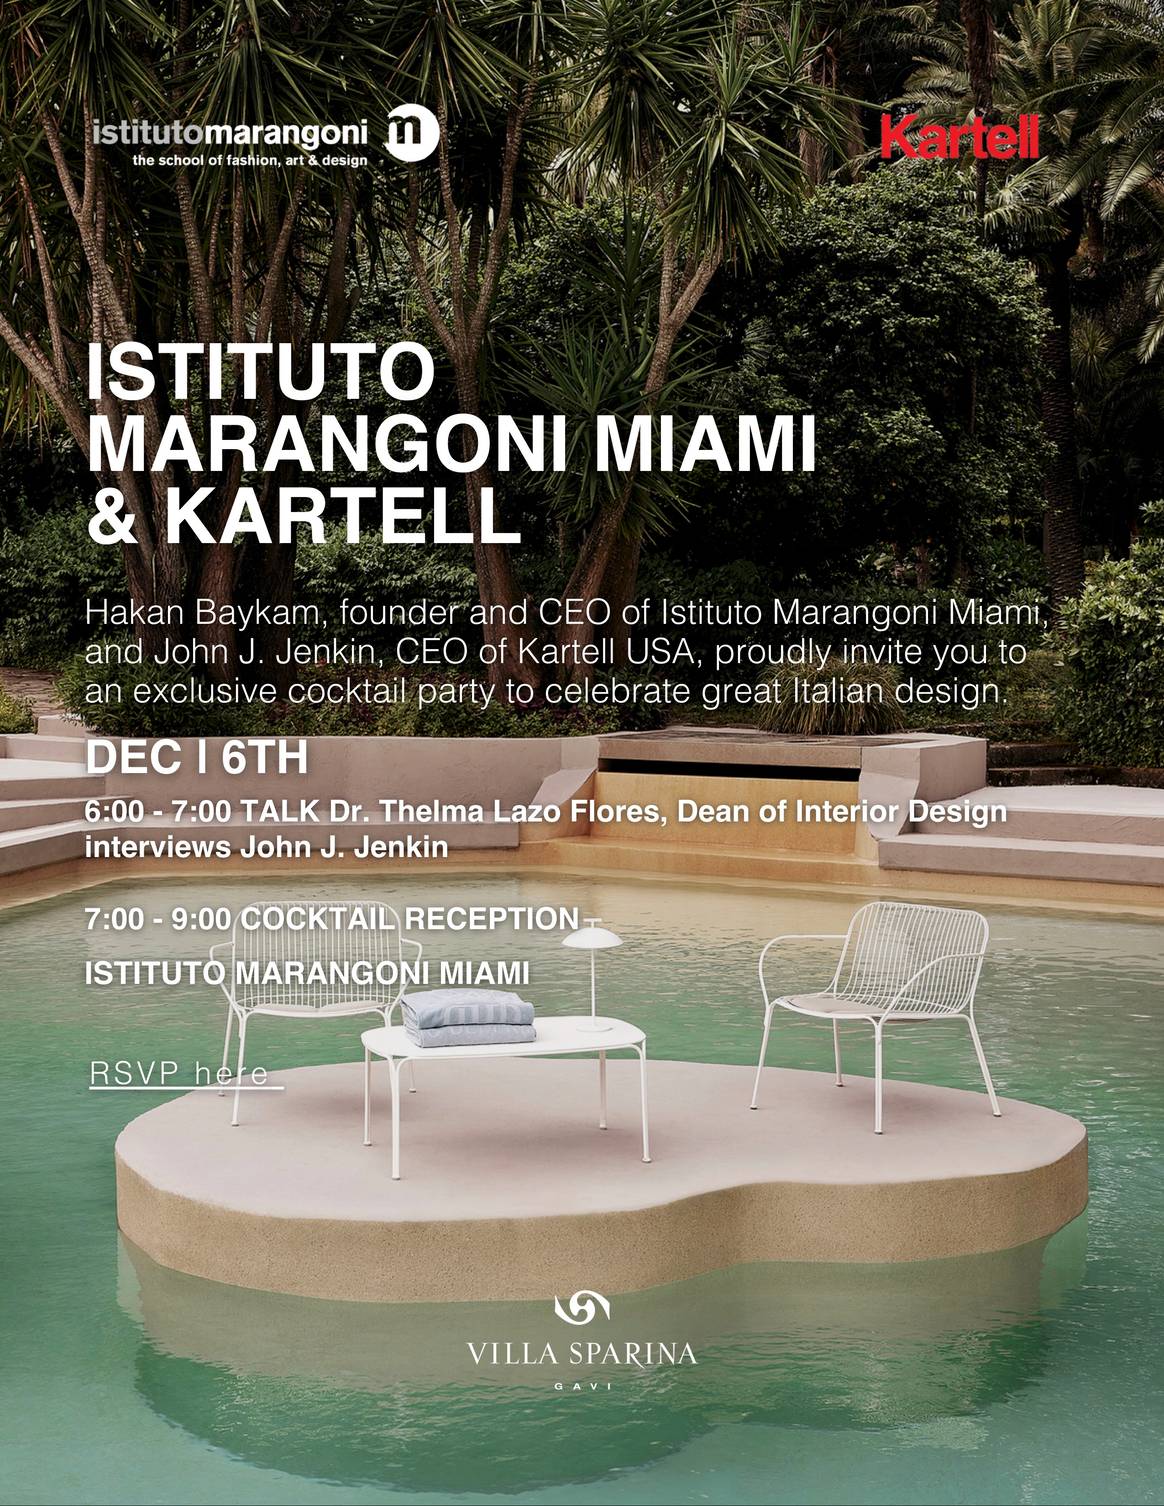 Poster announcing the design competition between IMM and Kartell